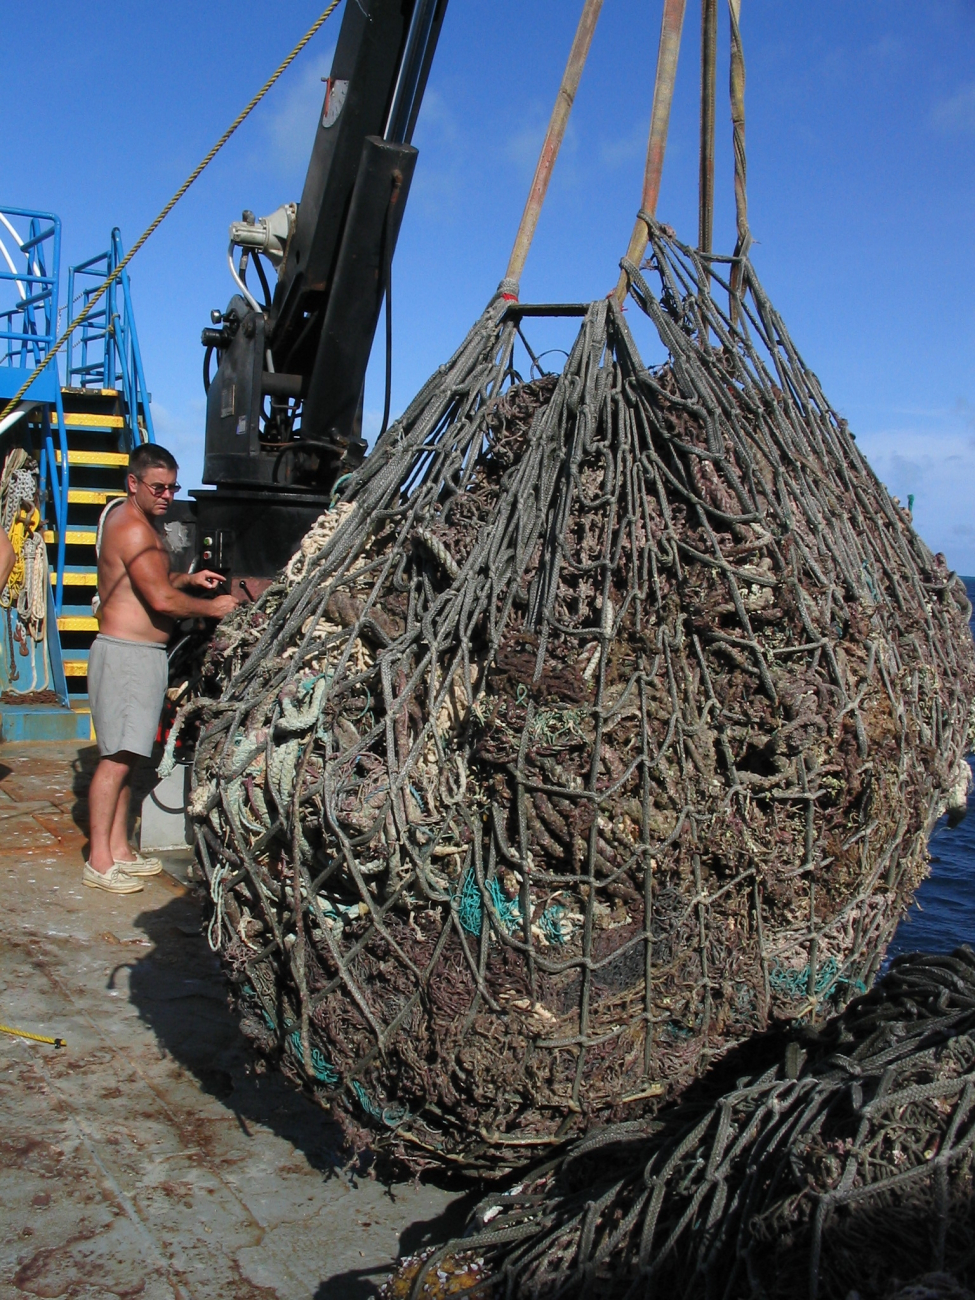 A big load of derelict net debris being loaded onto the deck of contract vesselCASITAS